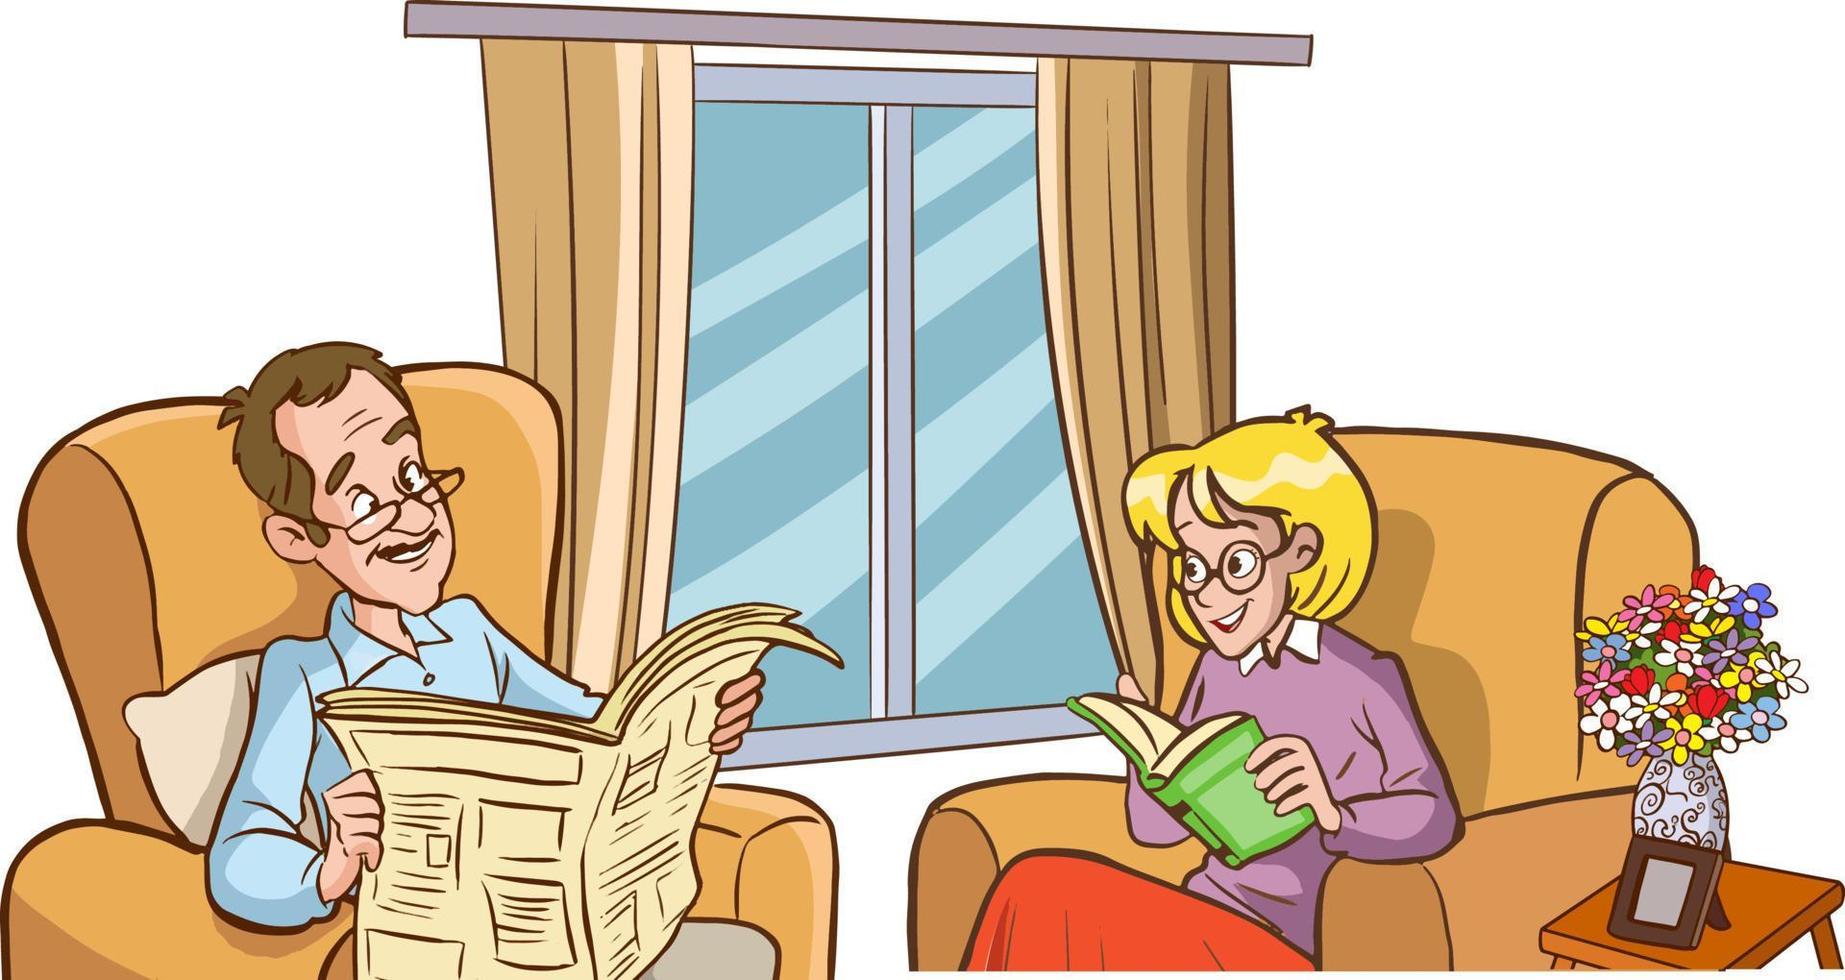 family drawing.woman reading book and man reading newspaper cartoon vector